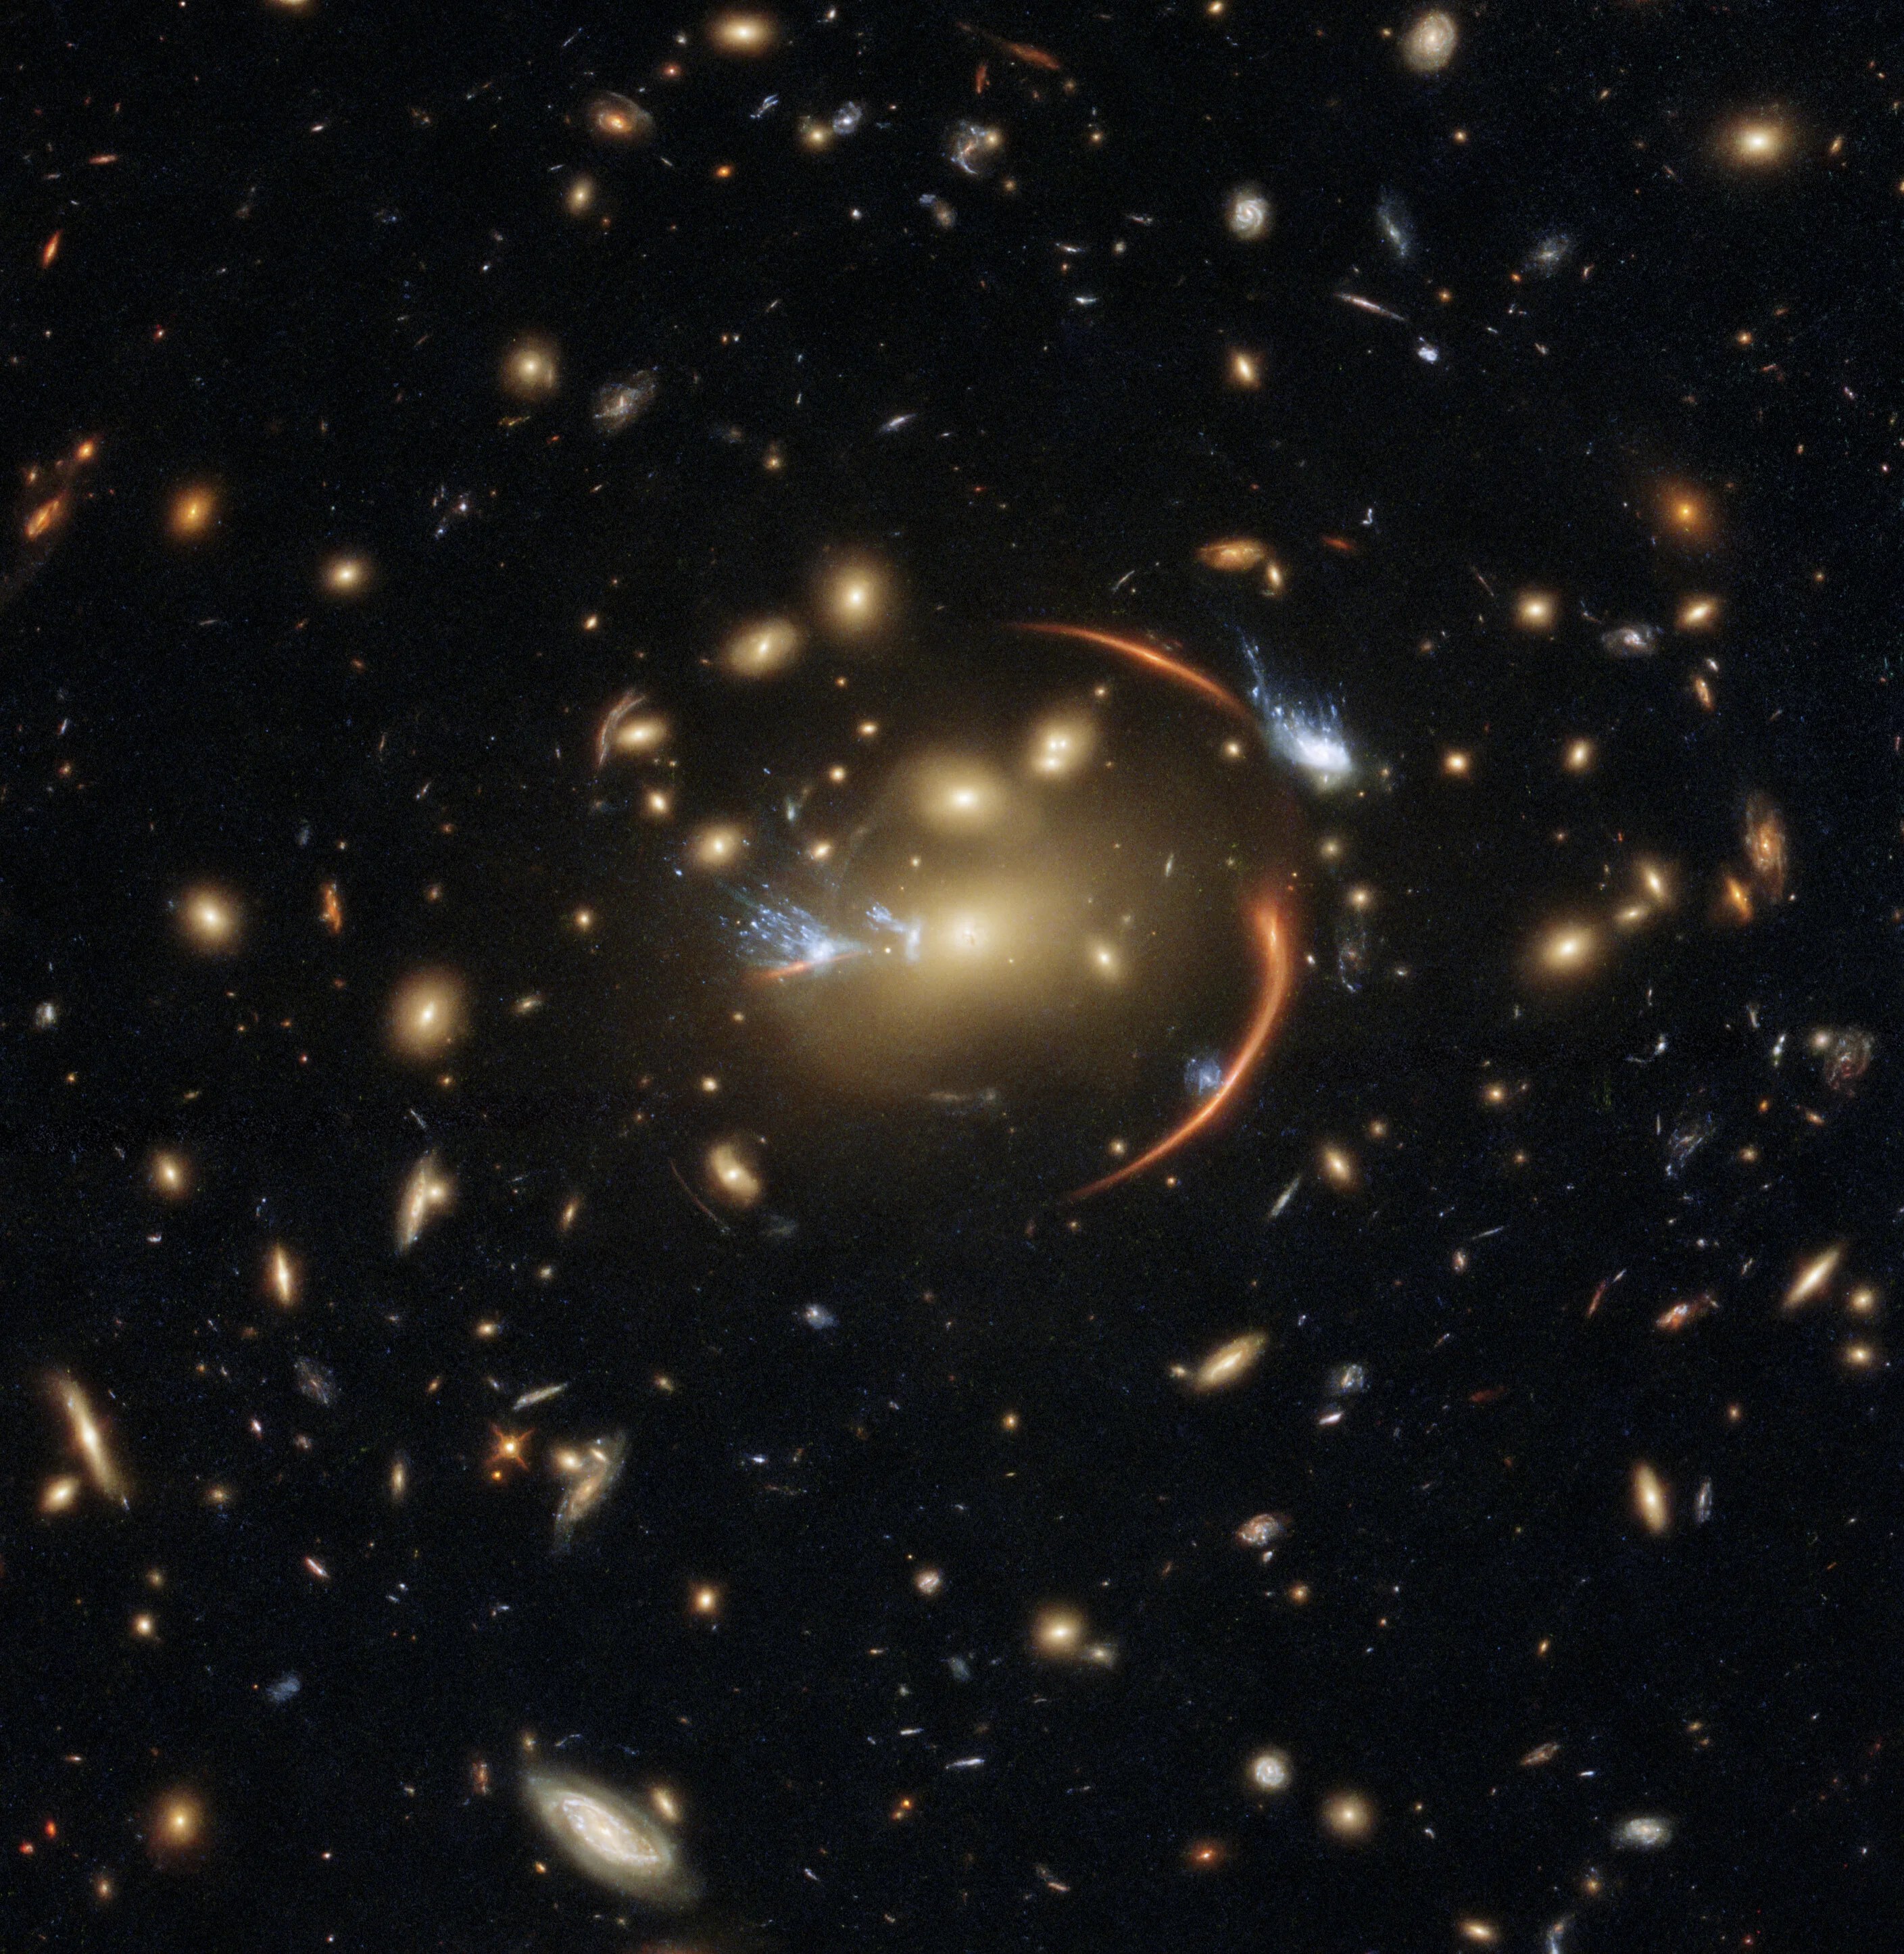 The center of this image from the nasa/esa hubble space telescope is framed by the tell-tale arcs that result from strong gravitational lensing.